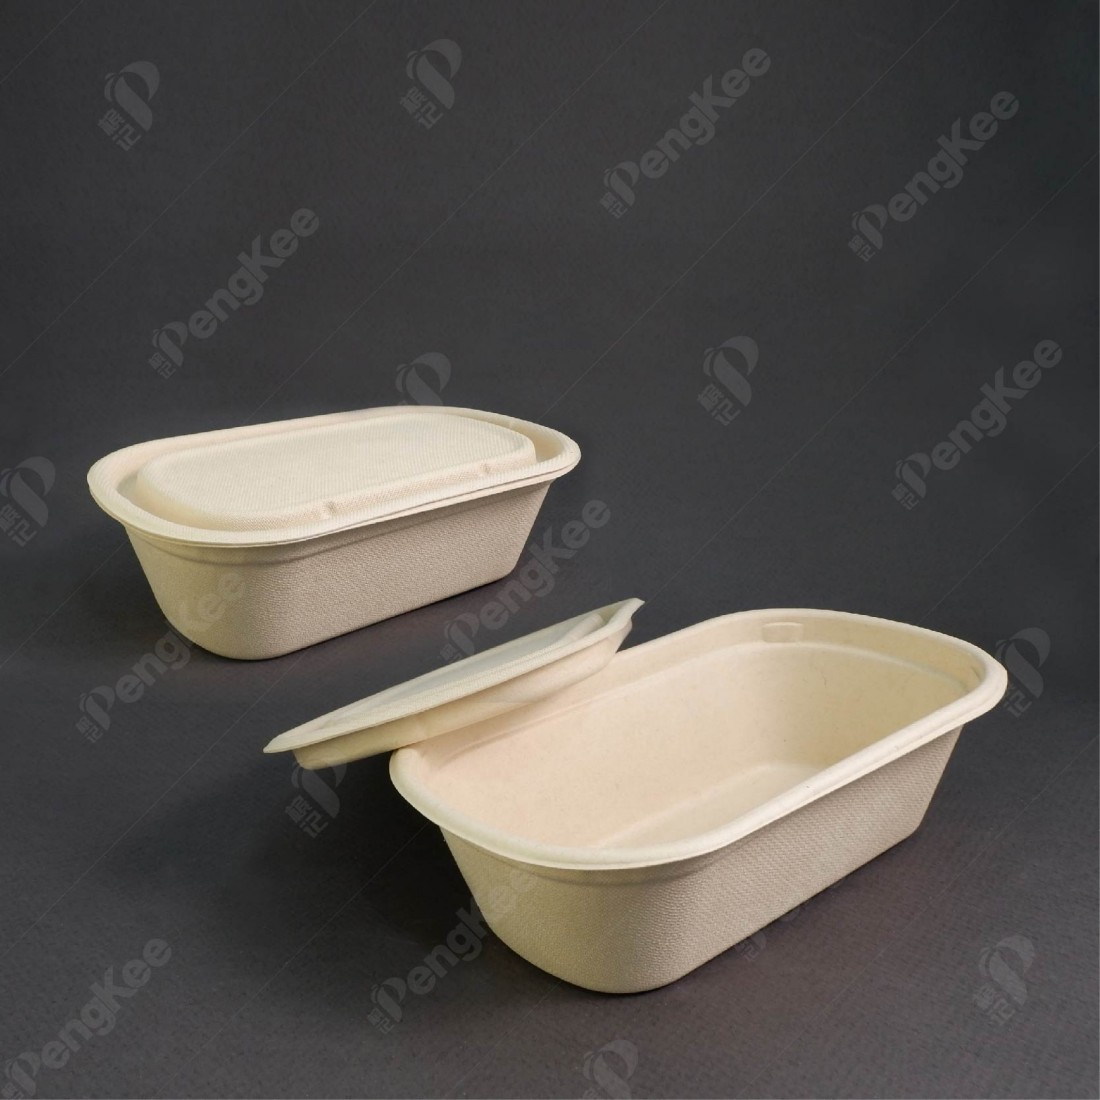 W303 1000ML SUGARCANE  UNBLEACHED OVAL LUNCH BOX WITH LID